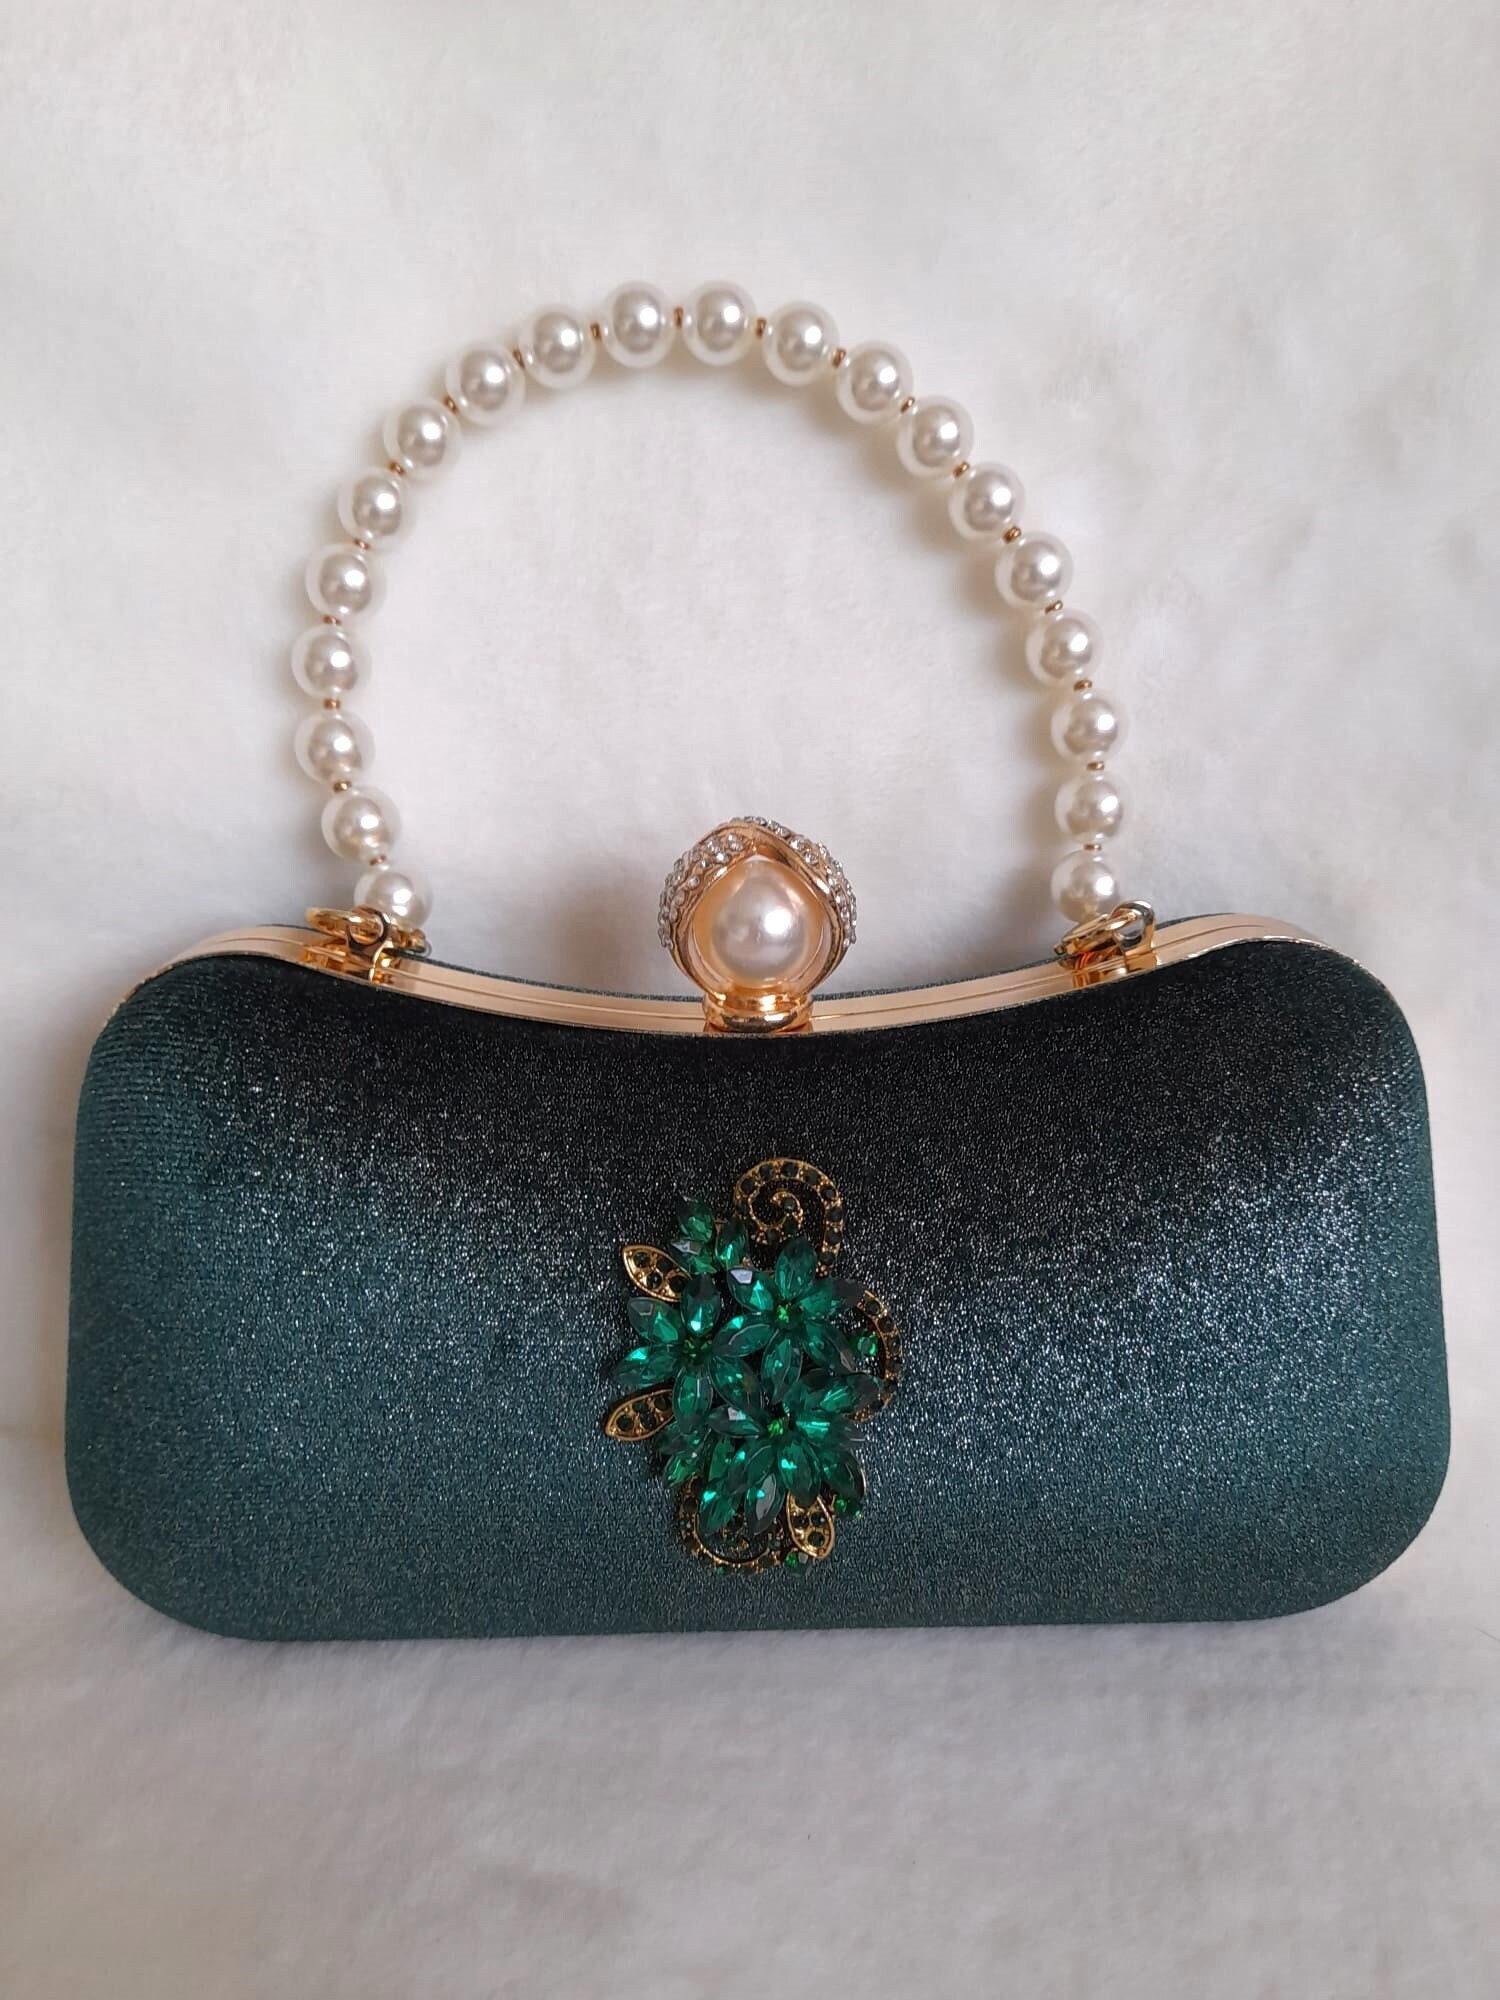 Velvet Emerald Green Clutch Purse, Bag Embroidered with Faux Diamonds, Shoulder Strap and Handle for Wedding, Evening Party and Ethnic Wear.